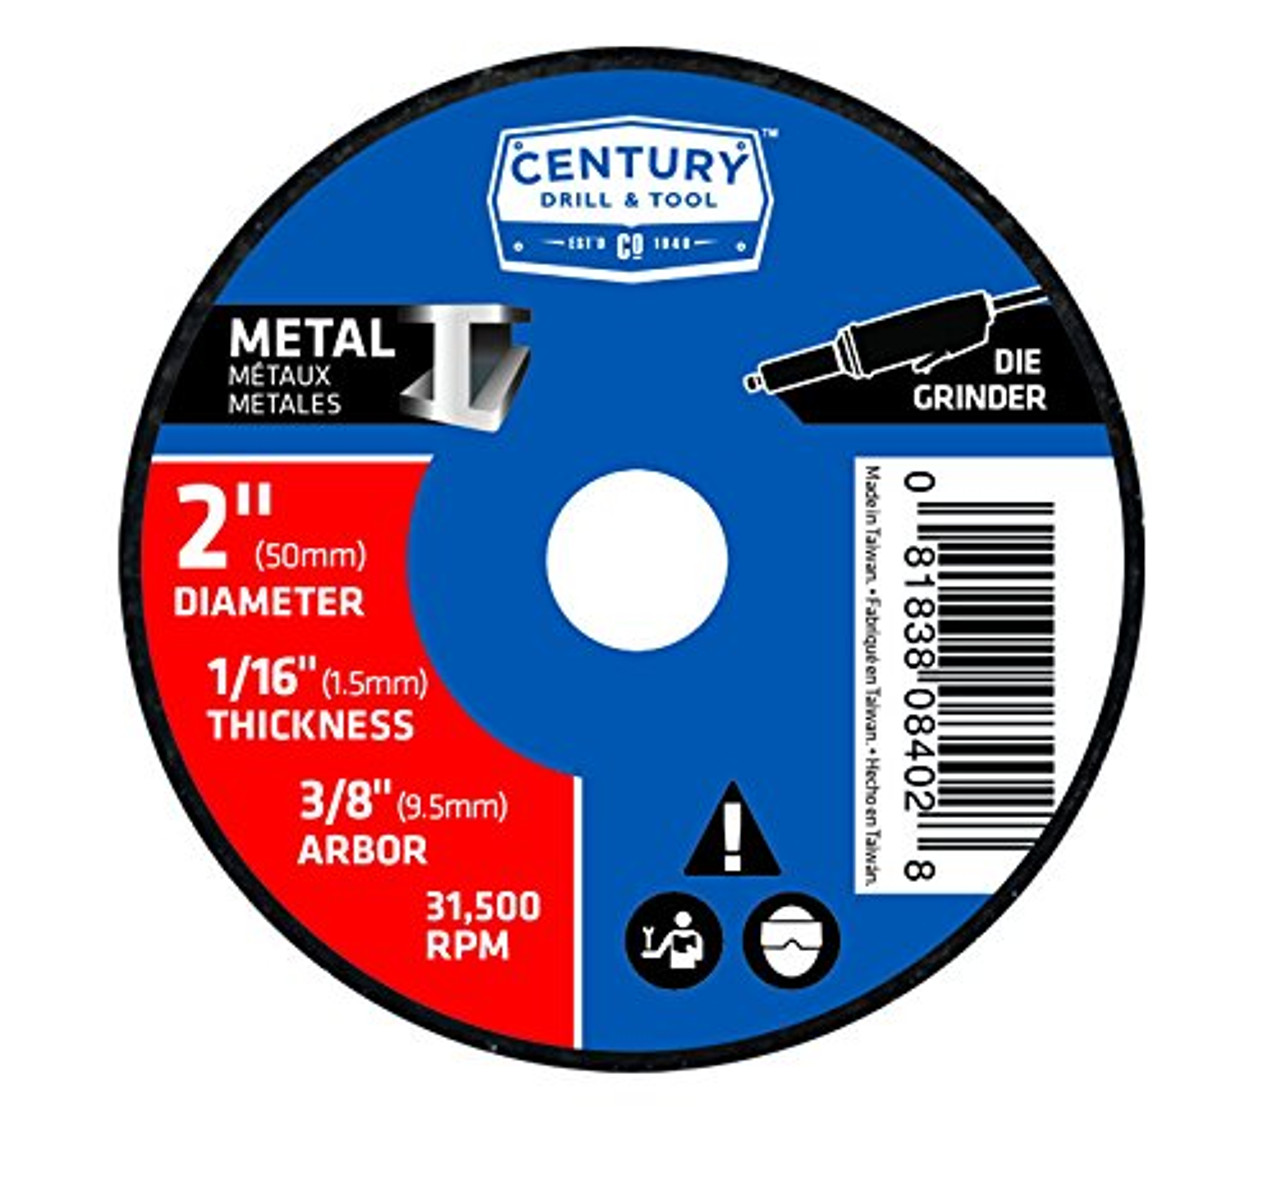 Century Drill & Tool 8402 Metal Abrasive Cutting and Grinding Wheel, 2" by 1/16"